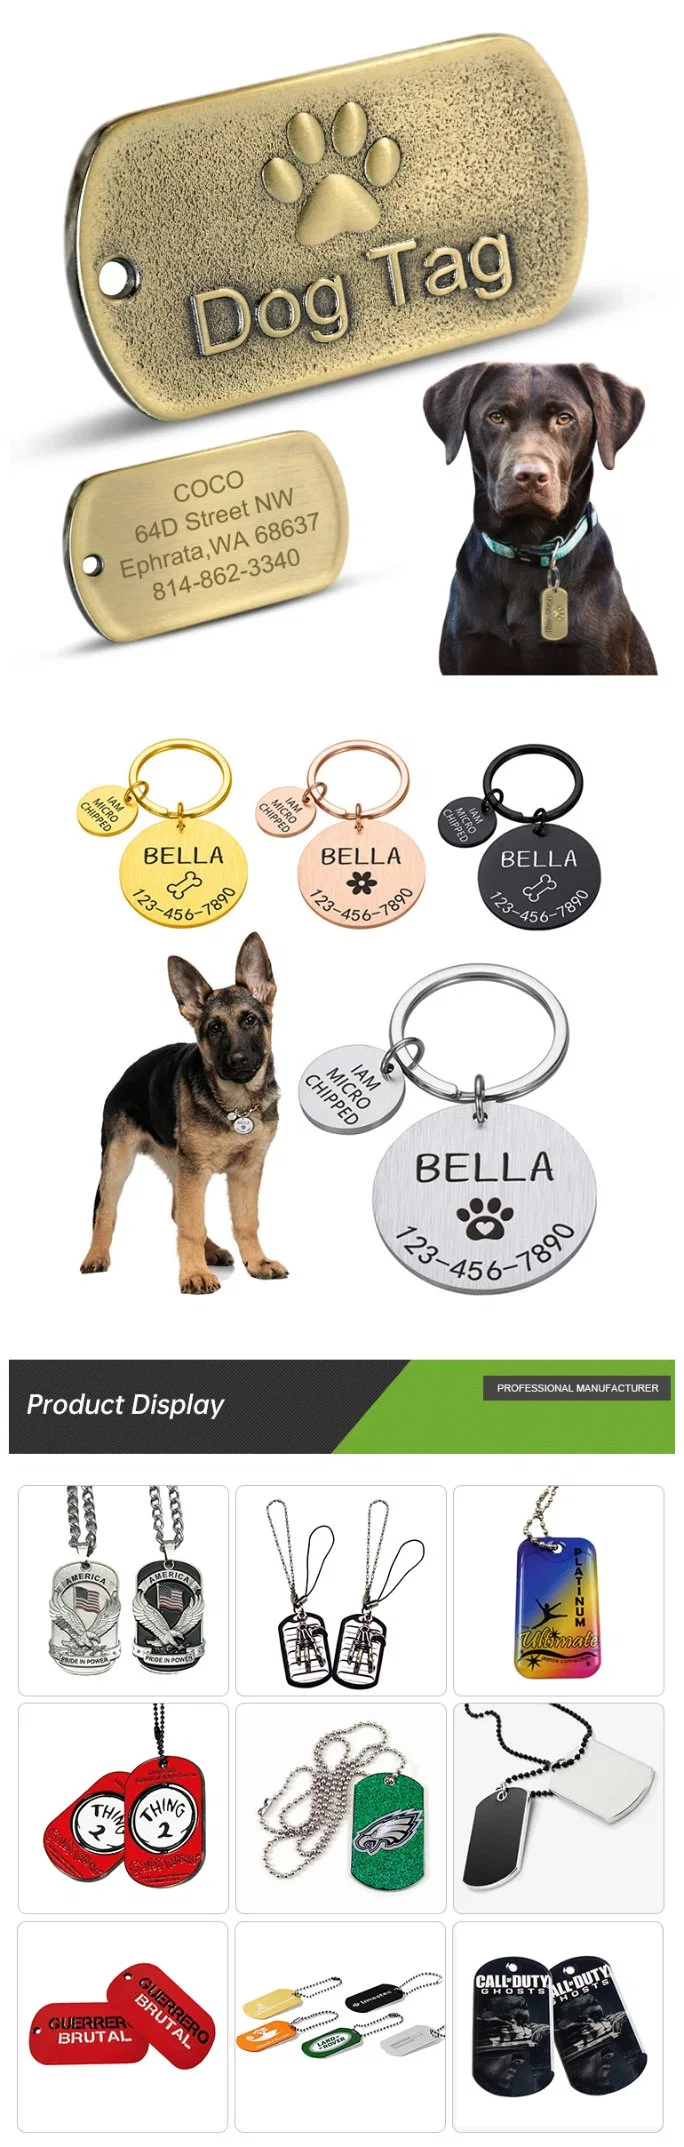 Metal ID Stainless Steel Paws Engraving with Spray Lacquer Finish with Any Color Blank Machinedog Engraved Xvideos Tag Dog